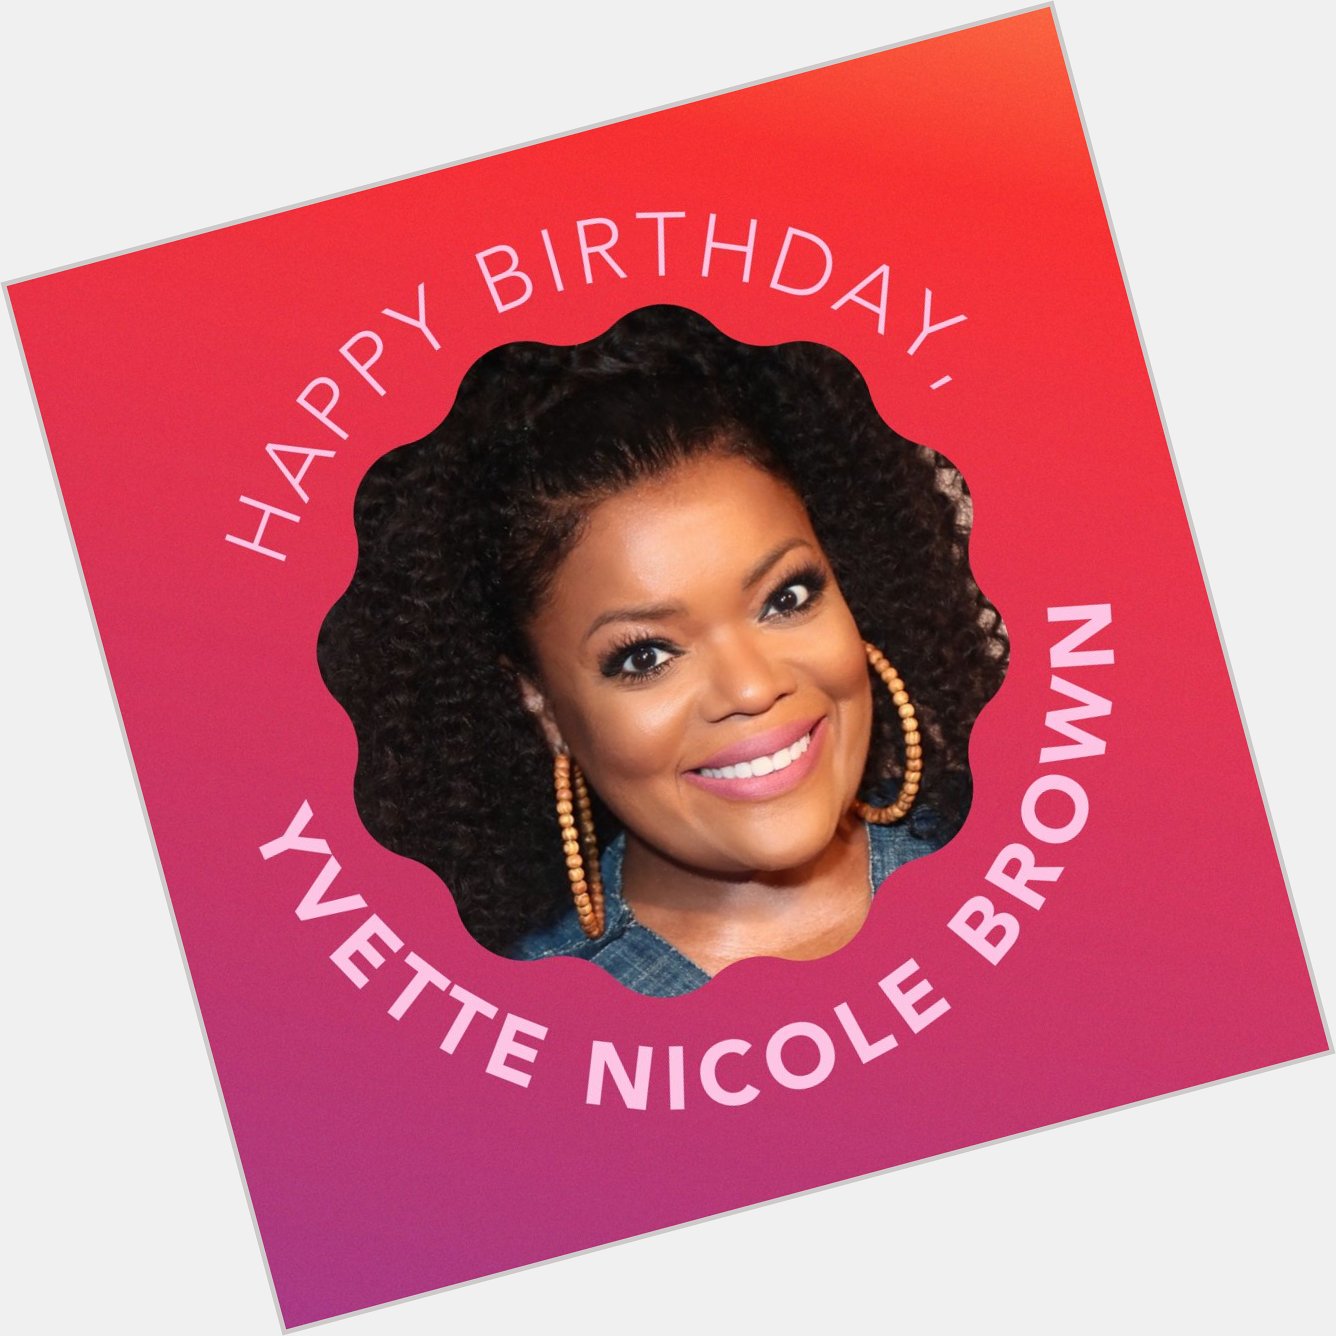 Happy birthday to the beautiful and talented, Yvette Nicole Brown. We hope you have a wonderful day!  